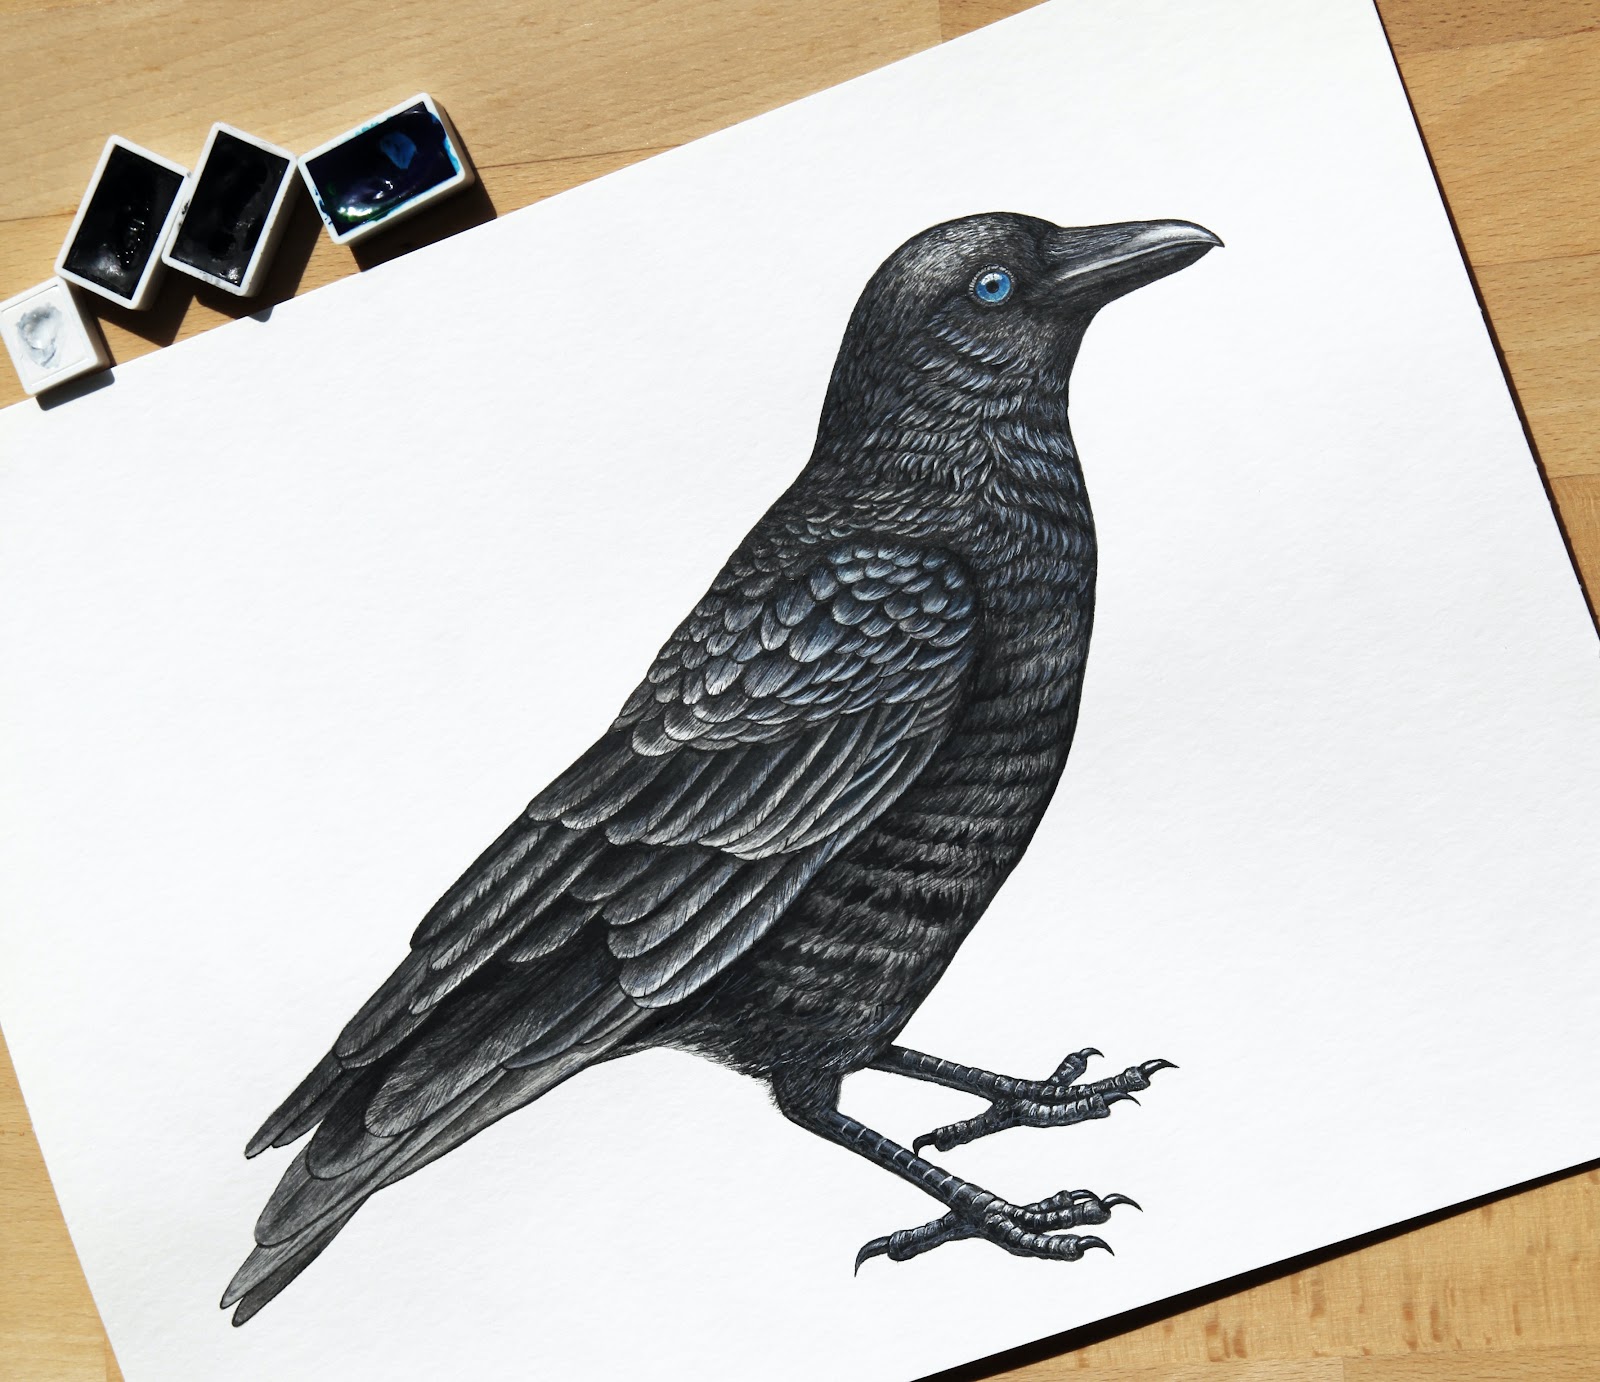 Bird drawing and painting workshop